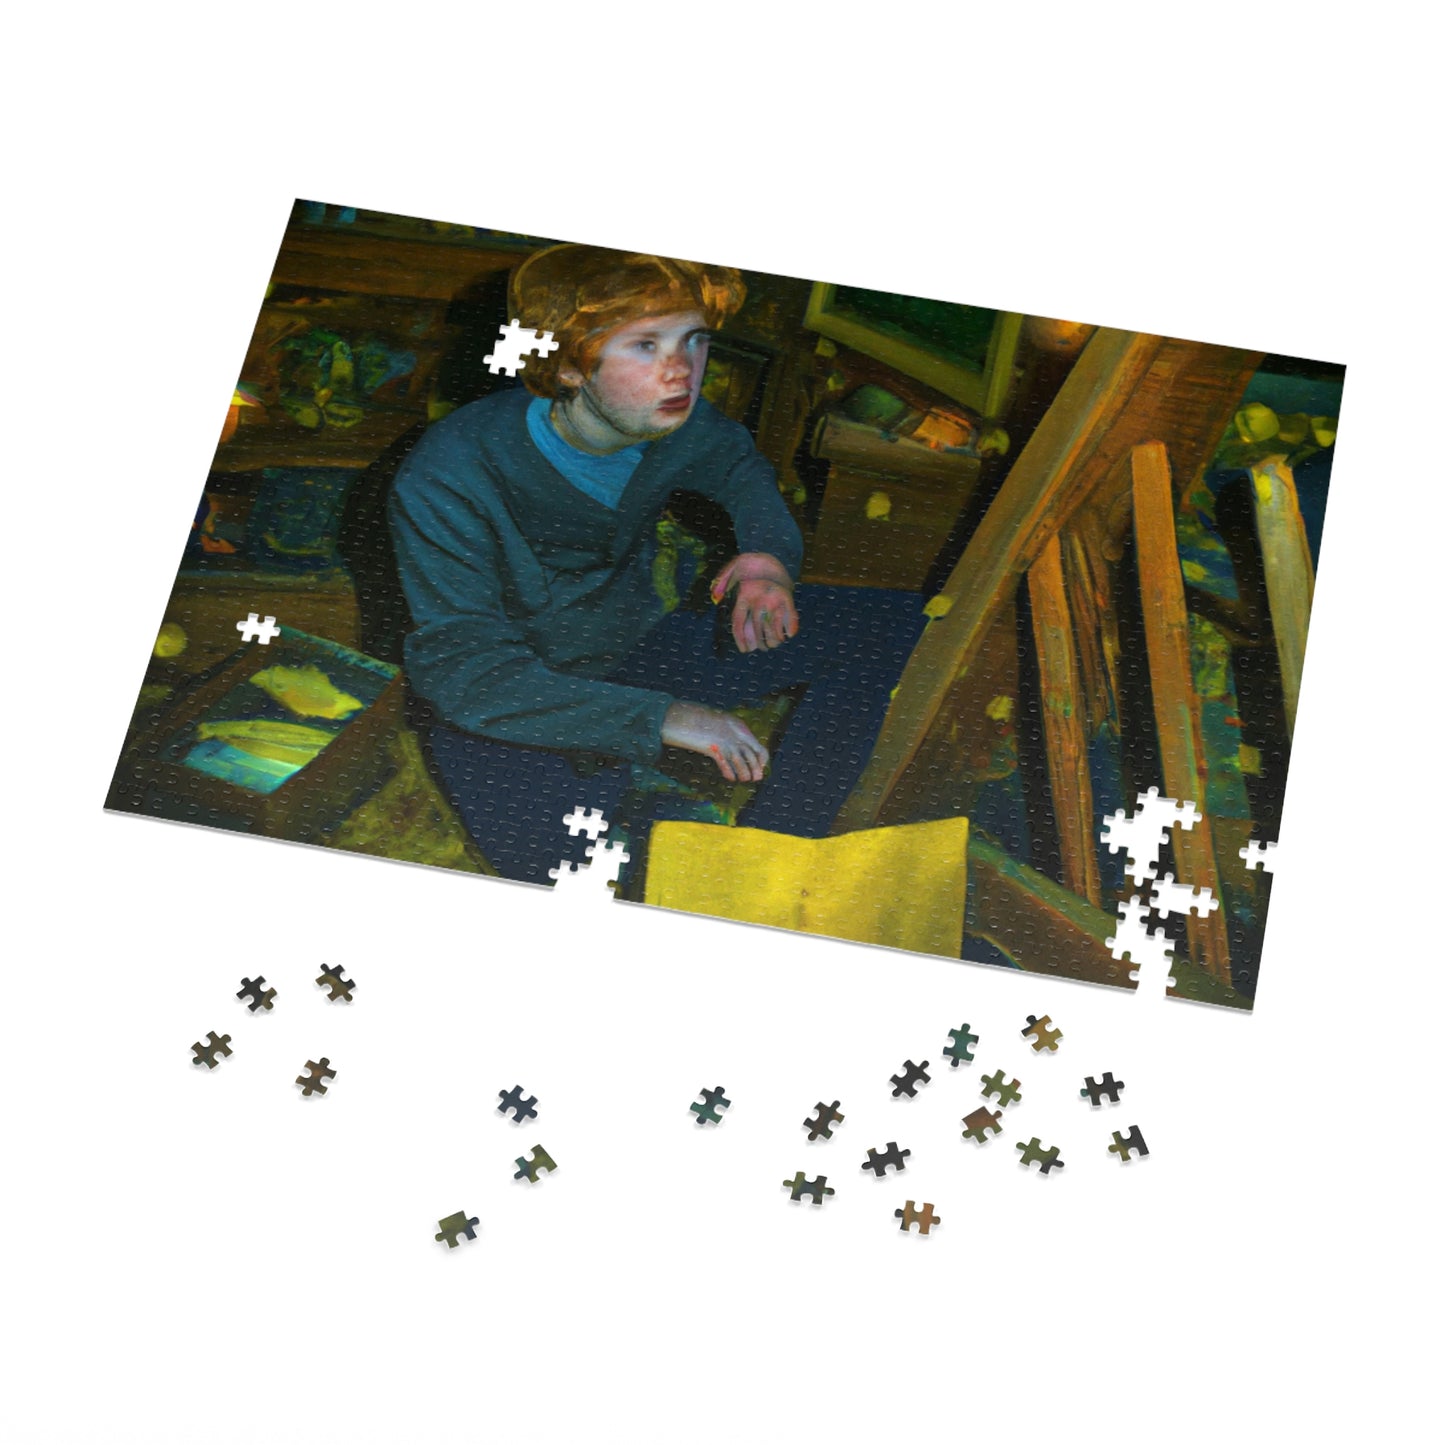 The Attic's Secrets: A Tale of Magic and Redemption - The Alien Jigsaw Puzzle